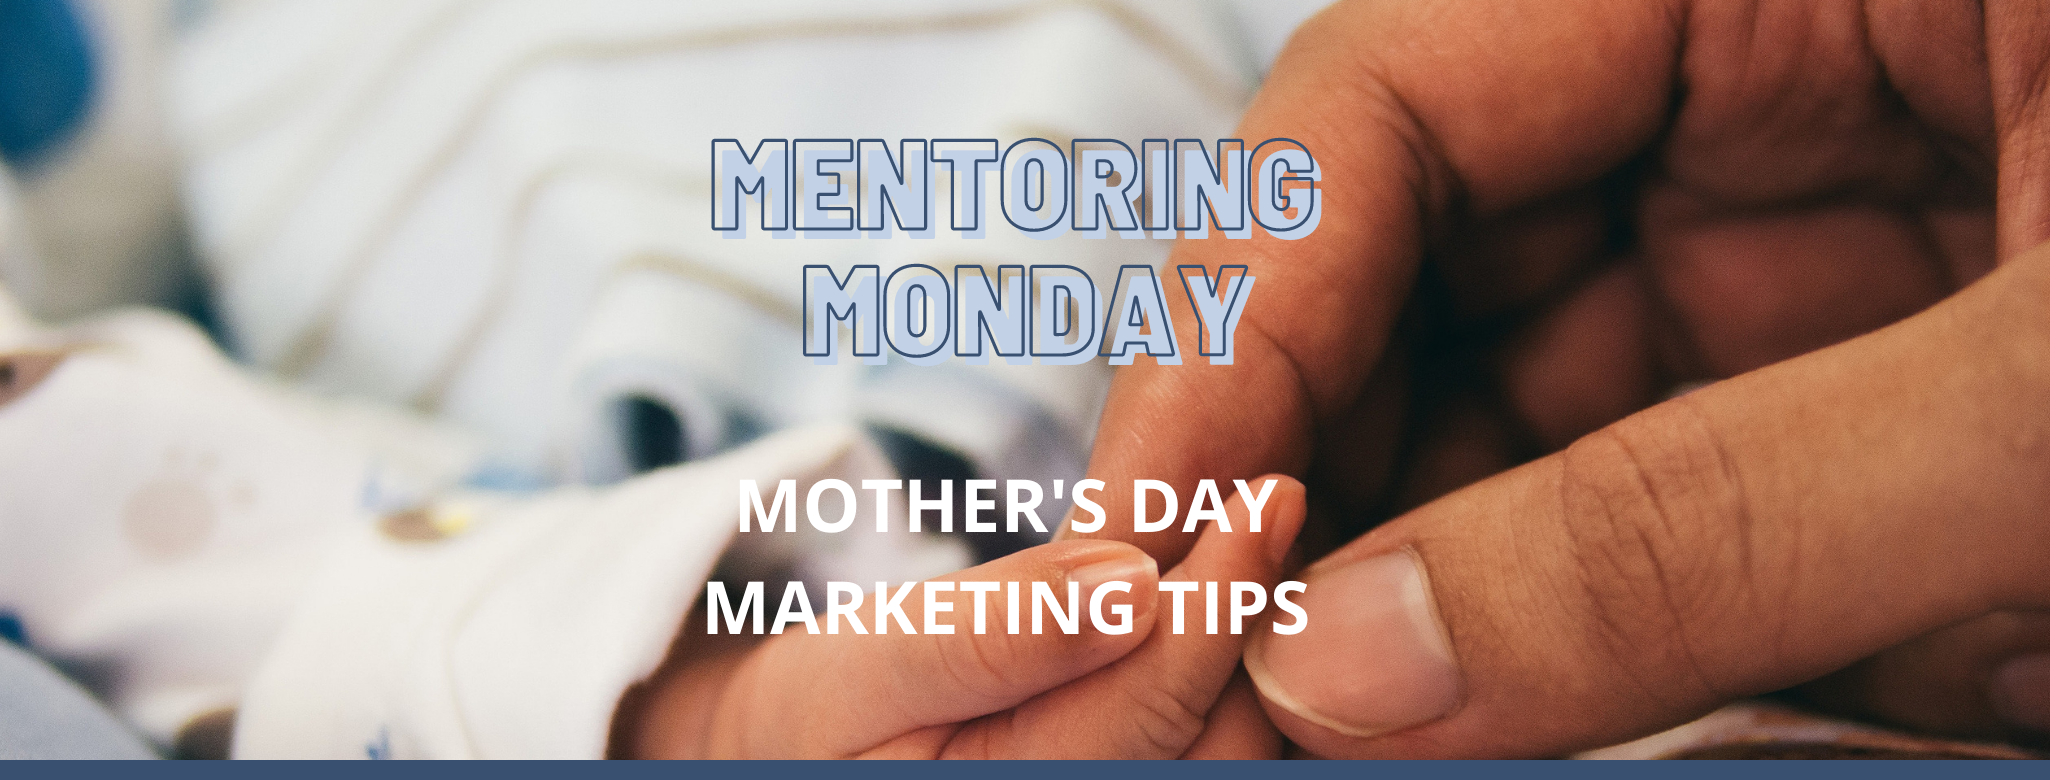 Mother's Day Marketing Tips